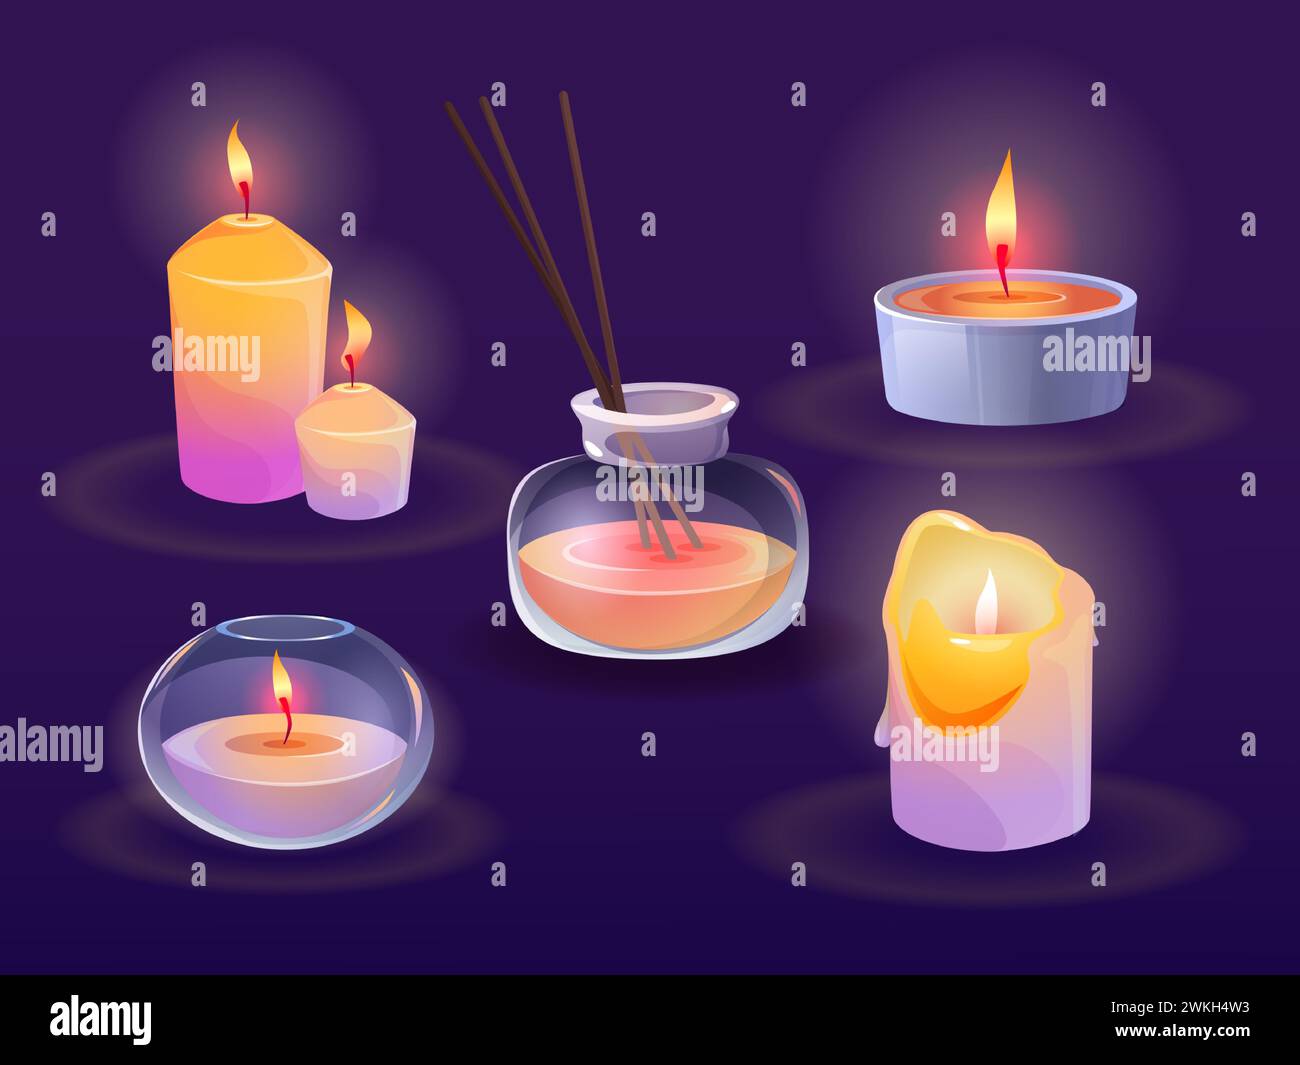 Aroma burning candles and scent diffuser with sticks. Cartoon vector illustration set of color candlelight for aromatherapy in glass jar and container with fragrance Stock Vector